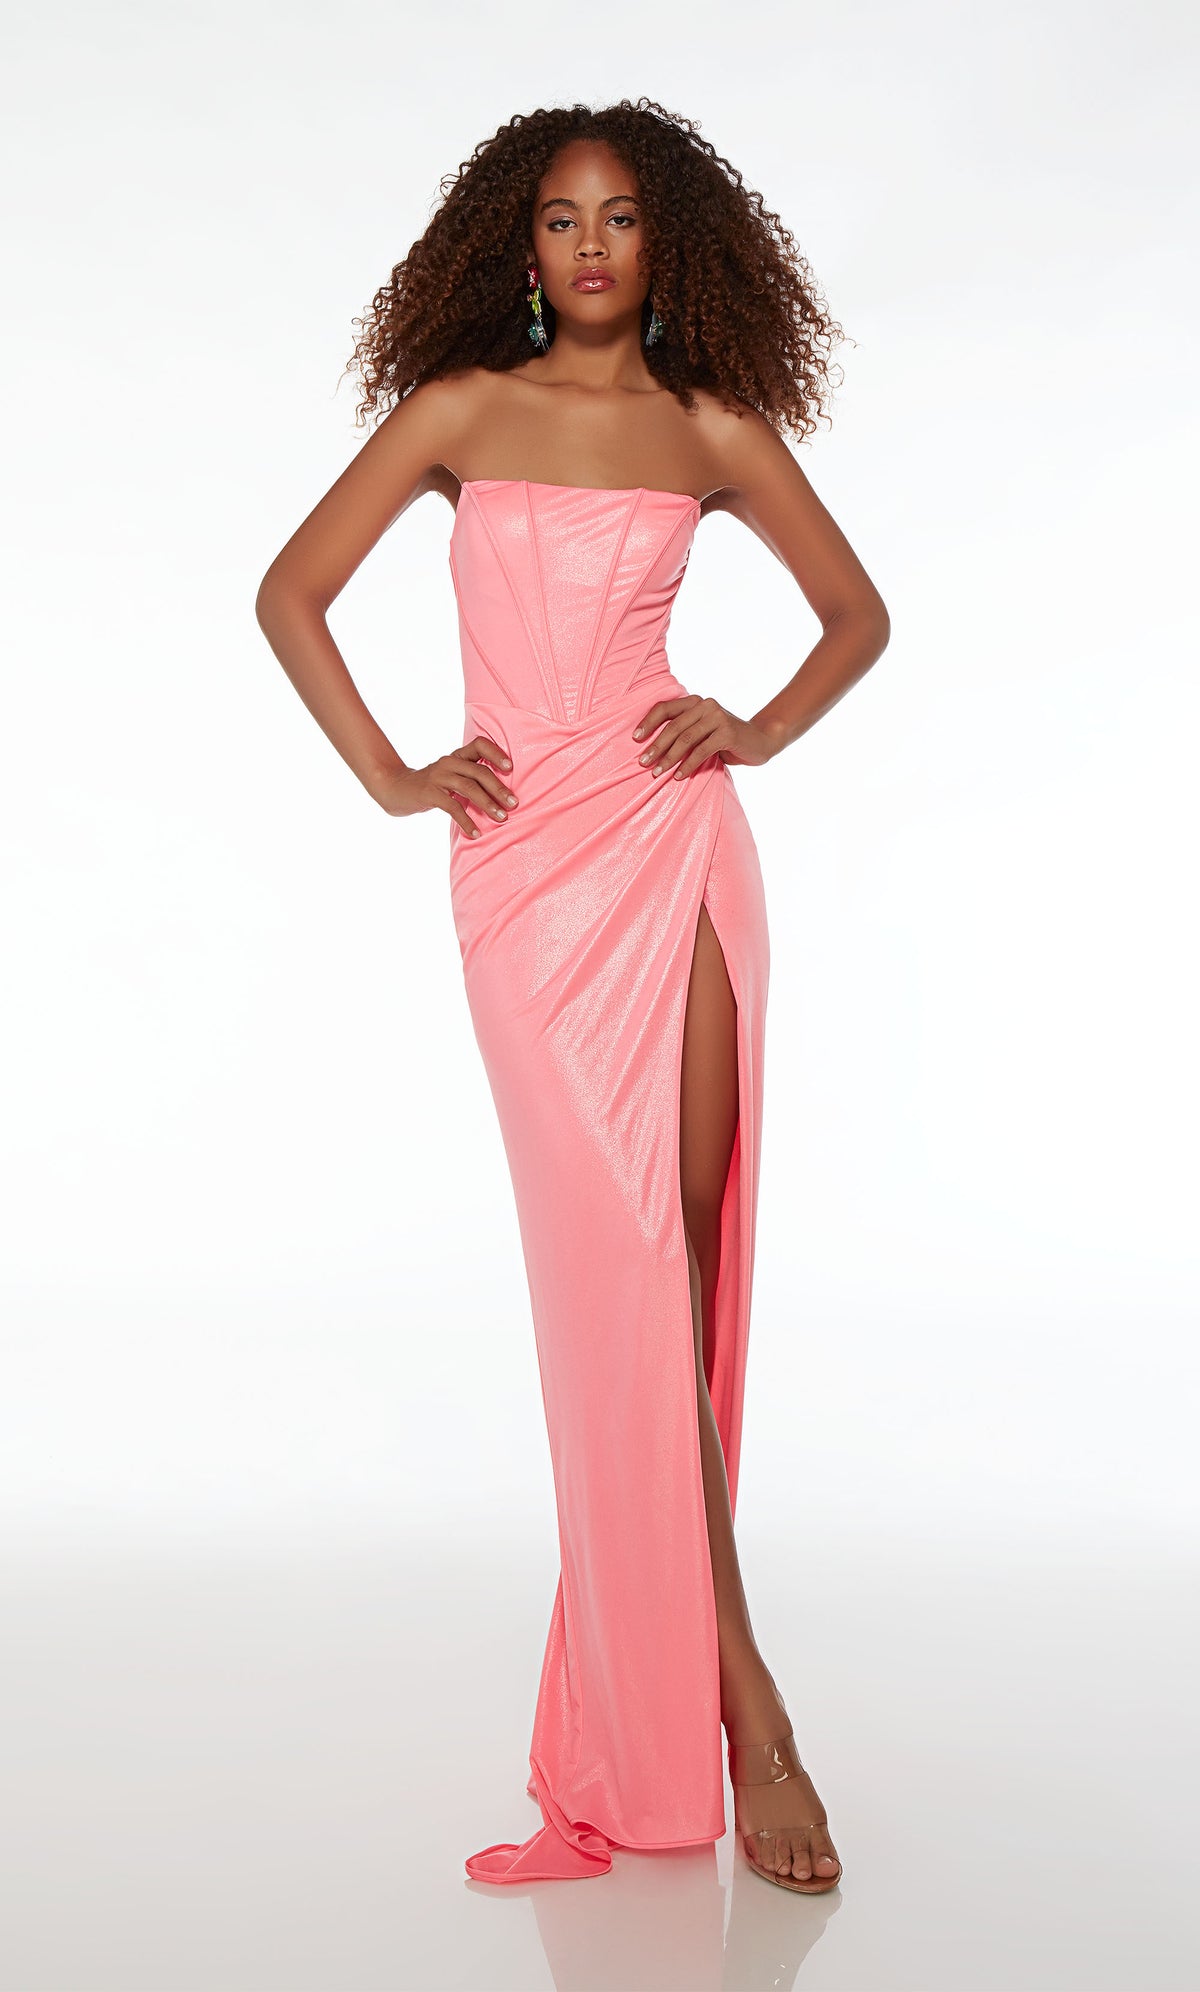 Form-fitting pink prom dress with an corset top, ruching detail, side slit, and an slight train, all crafted in metallic jersey for an stylish and glamorous appeal.